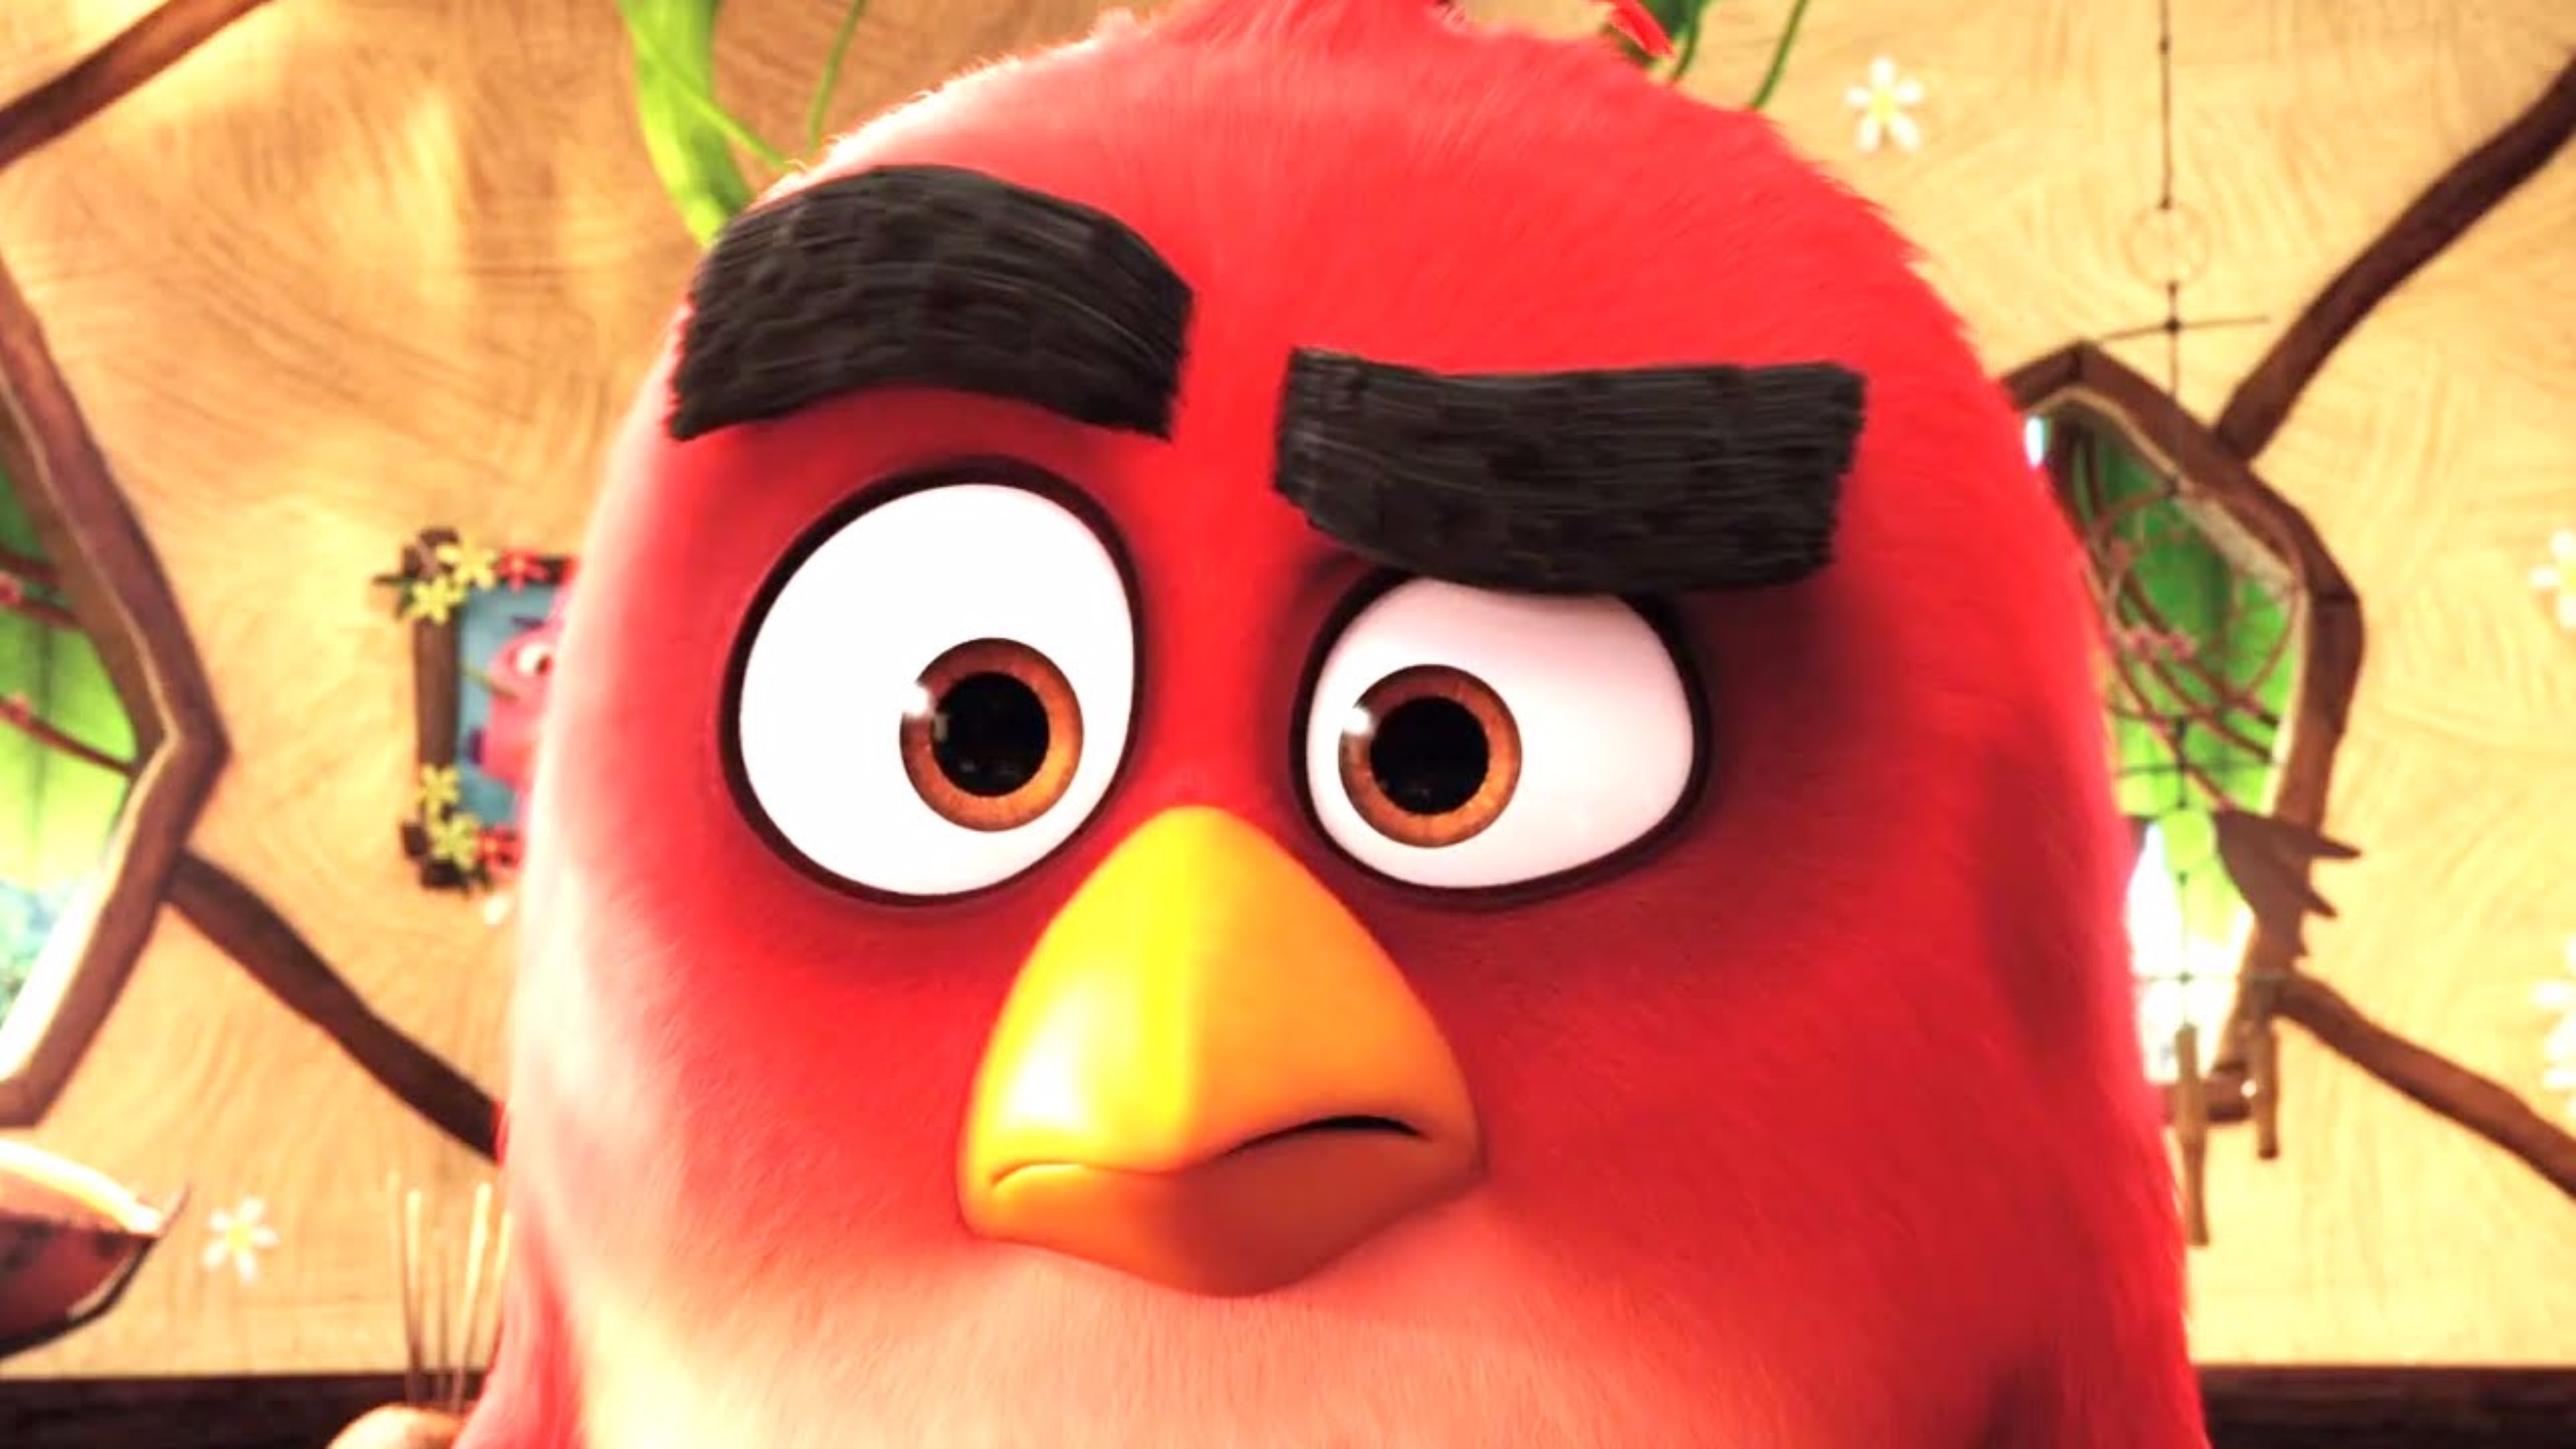 Angry birds animated movie green and yellow cute baby birds 4K wallpaper  download